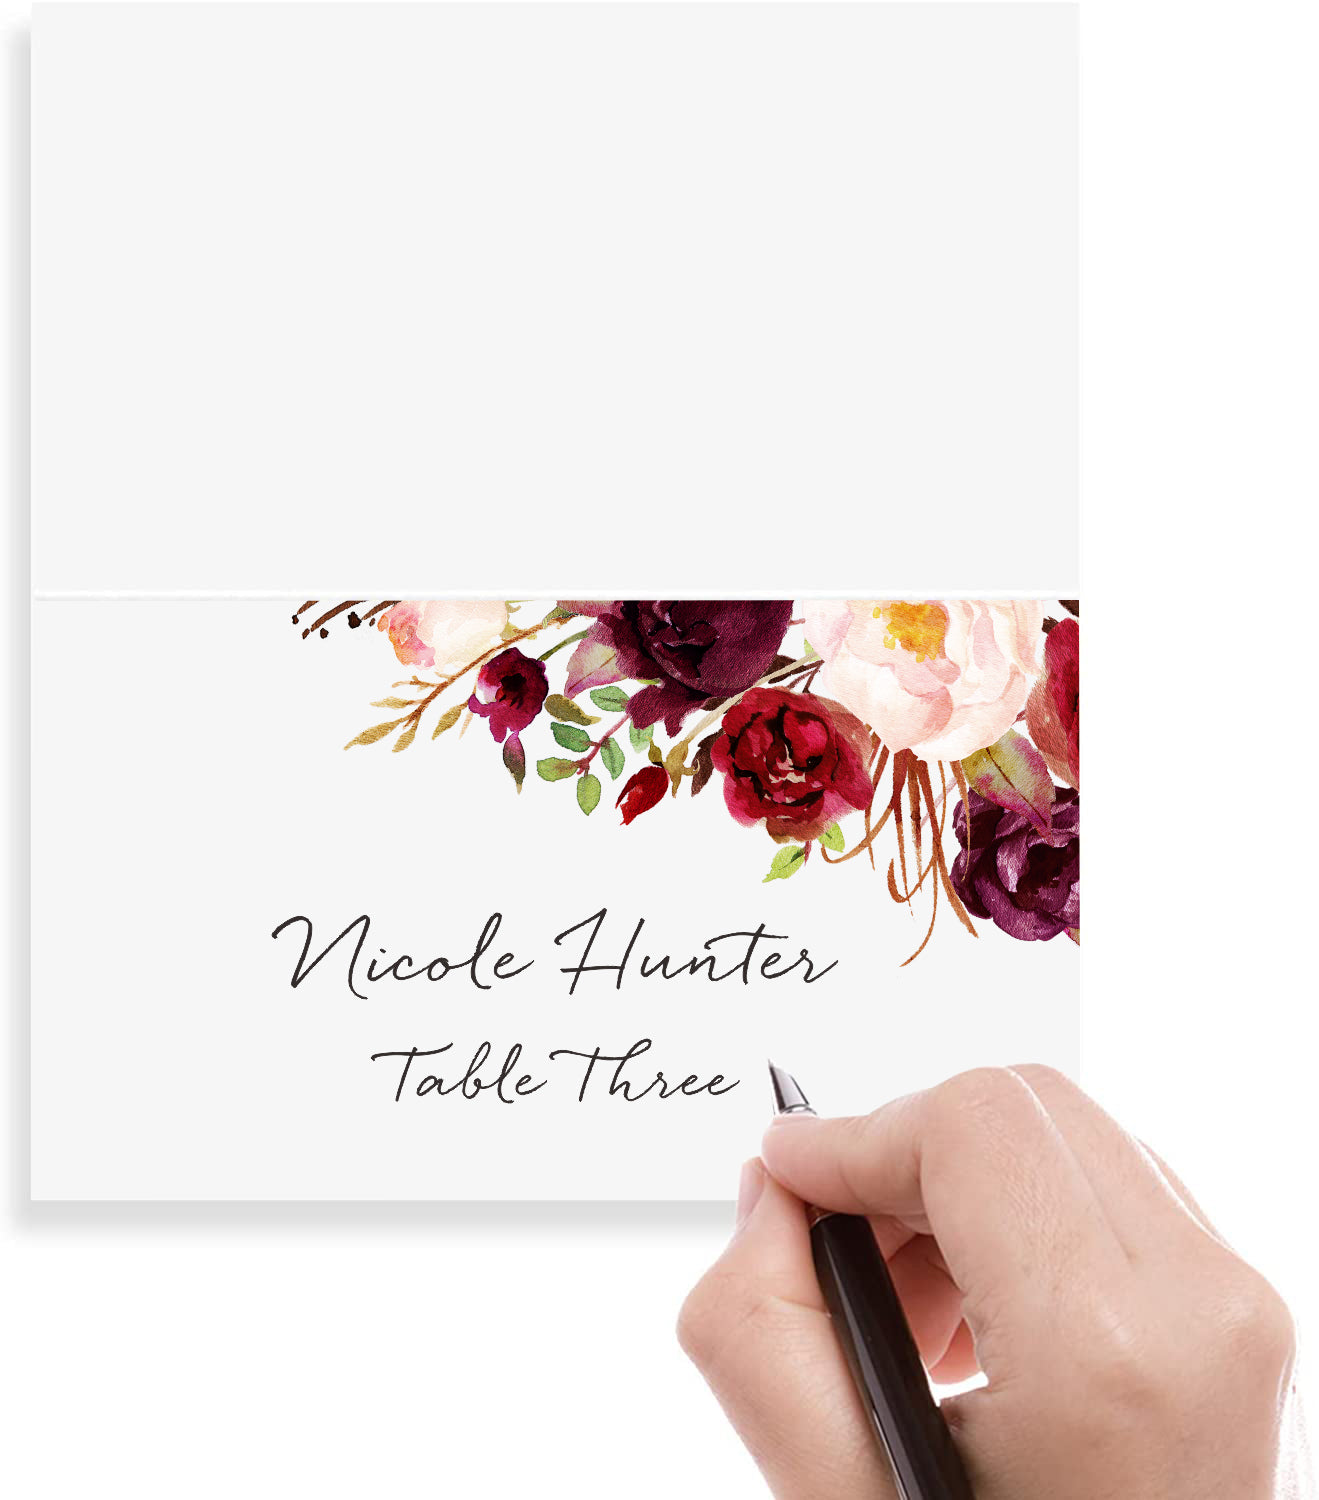 Floral Place Cards for Wedding or Party, Seating Place Cards for Tables, Scored for Easy Folding, Burgundy Flower Design, 2 x 3.5 Inches